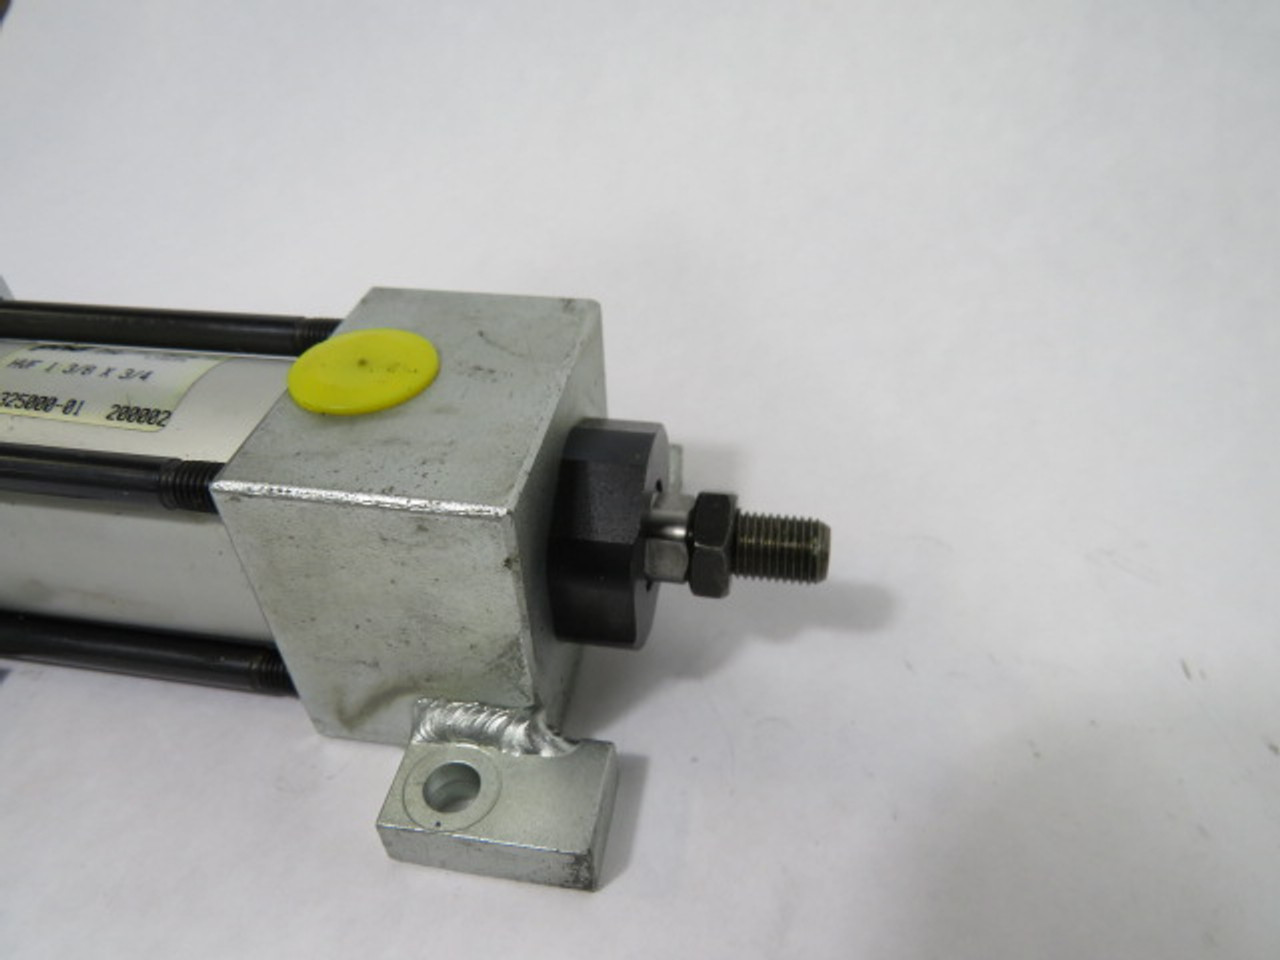 PHD HVF-1-3/8X3/4 Pneumatic Cylinder 1-3/8" Bore 3/4" Stroke USED